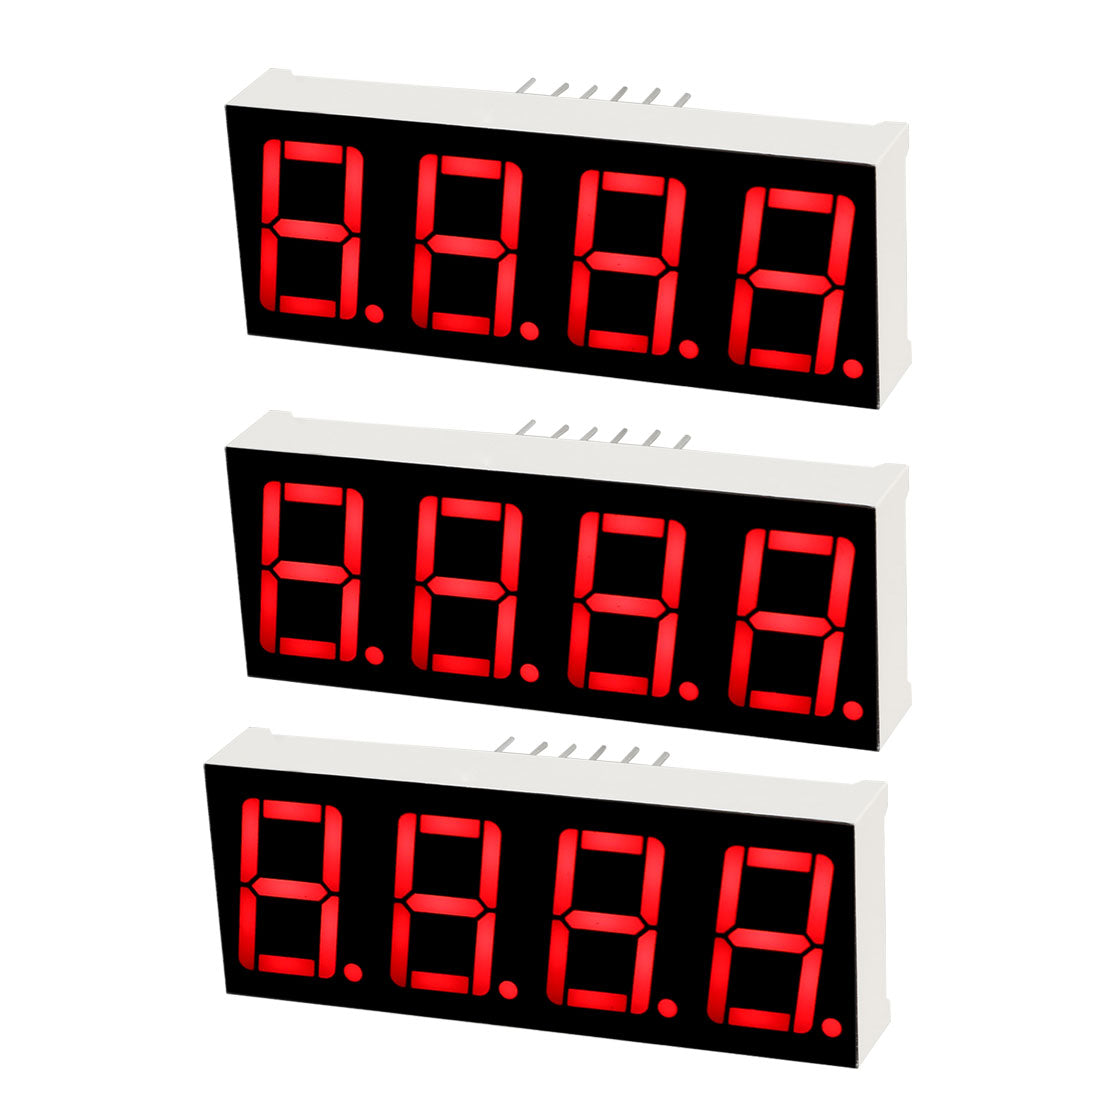 Uxcell Uxcell Common Cathode 12Pin 4 Bit 7 Segment 1.98 x 0.75 x 0.31 Inch 0.55" Red LED Display Digital Tube 5pcs